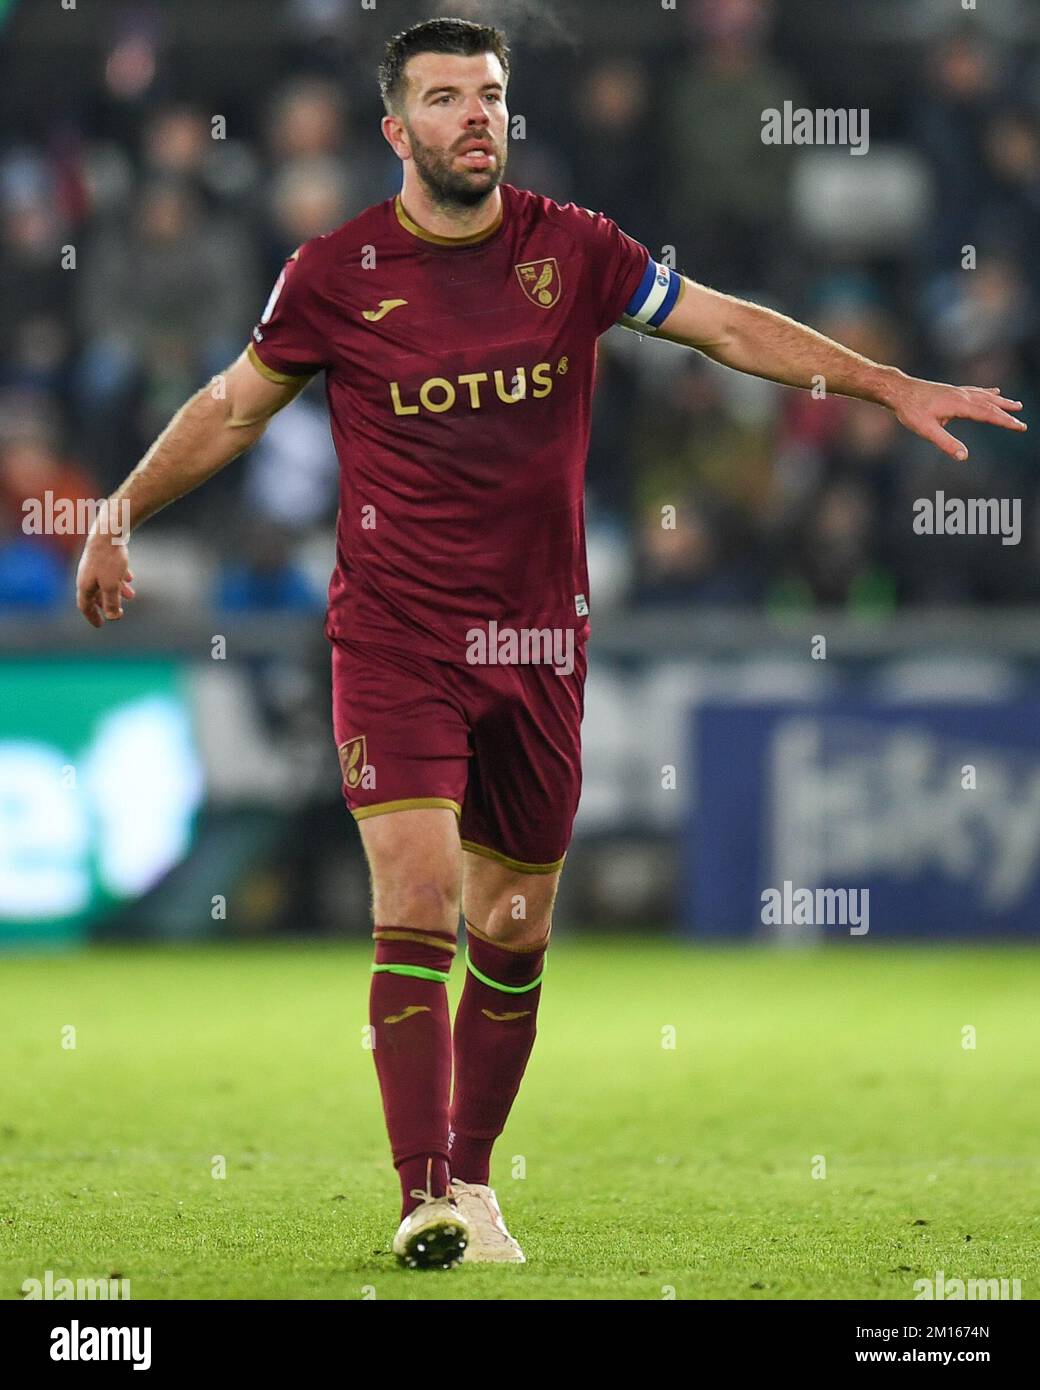 Grant Hanley #5 of Norwich City during the Sky Bet Championship match Swansea City vs Norwich City at Swansea.com Stadium, Swansea, United Kingdom, 10th December 2022  (Photo by Mike Jones/News Images) Stock Photo